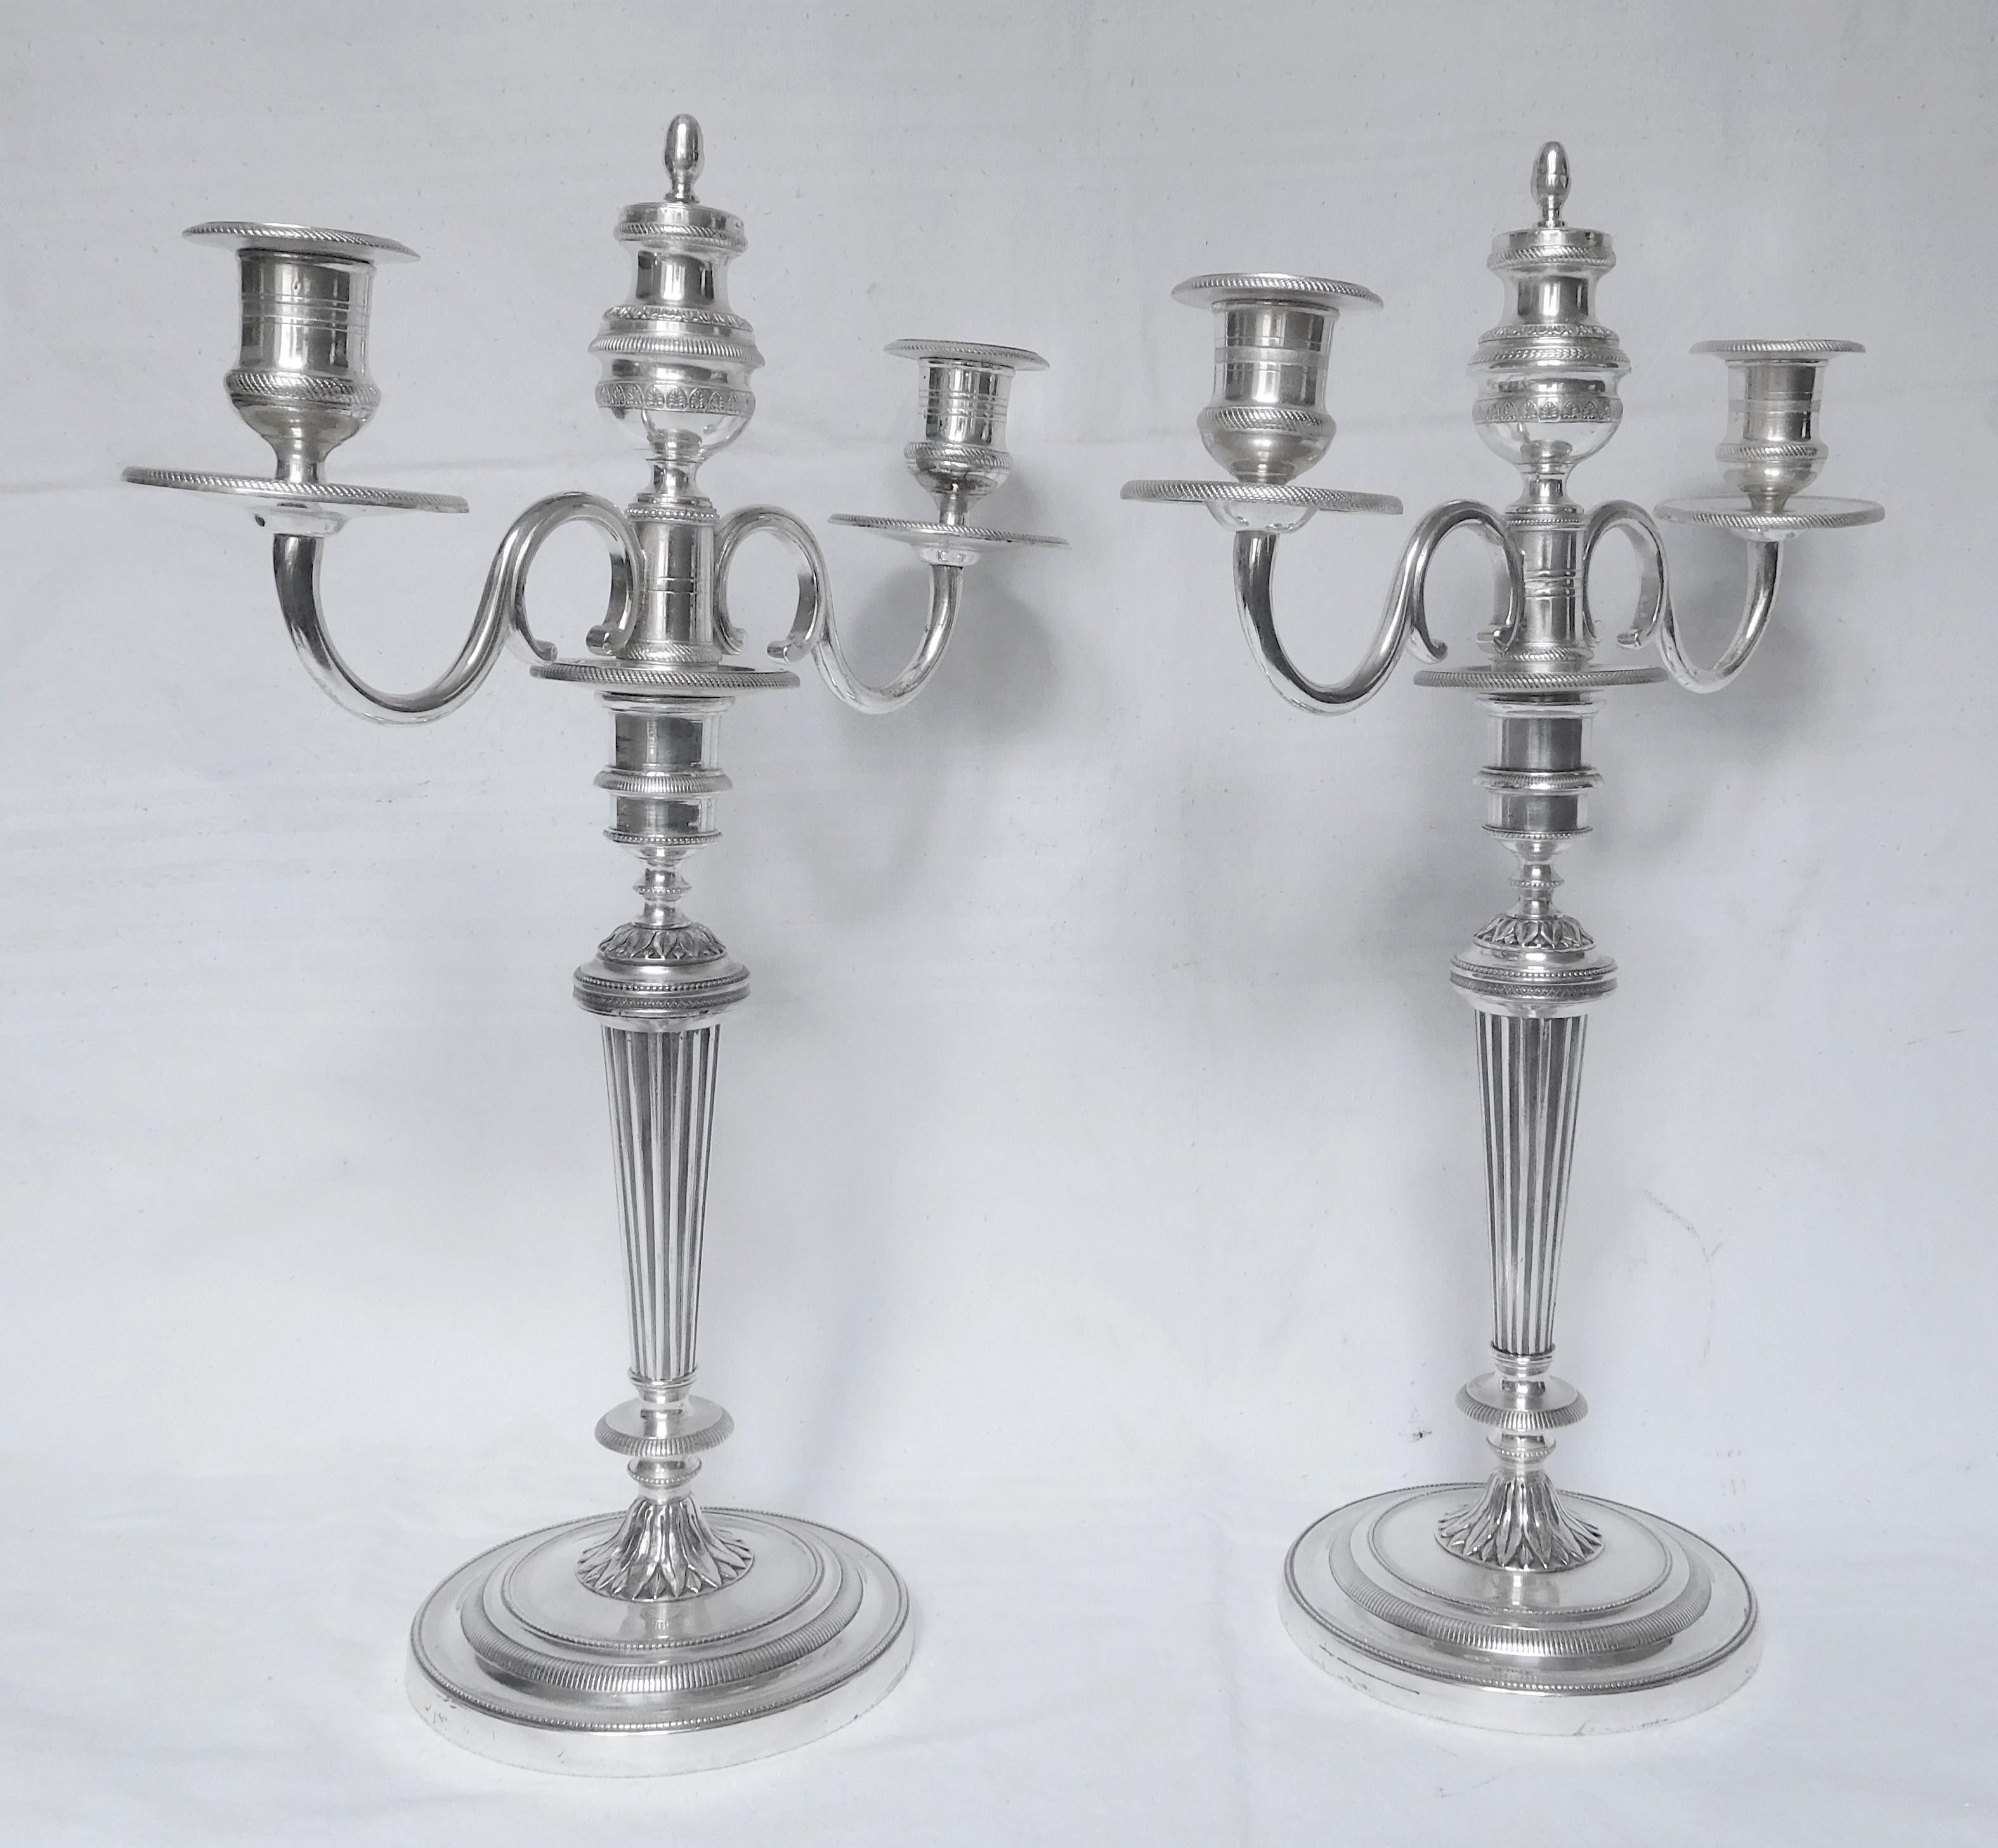 French Pair of Tall Empire silver plate Candelabras by JG Galle - early 19th century For Sale